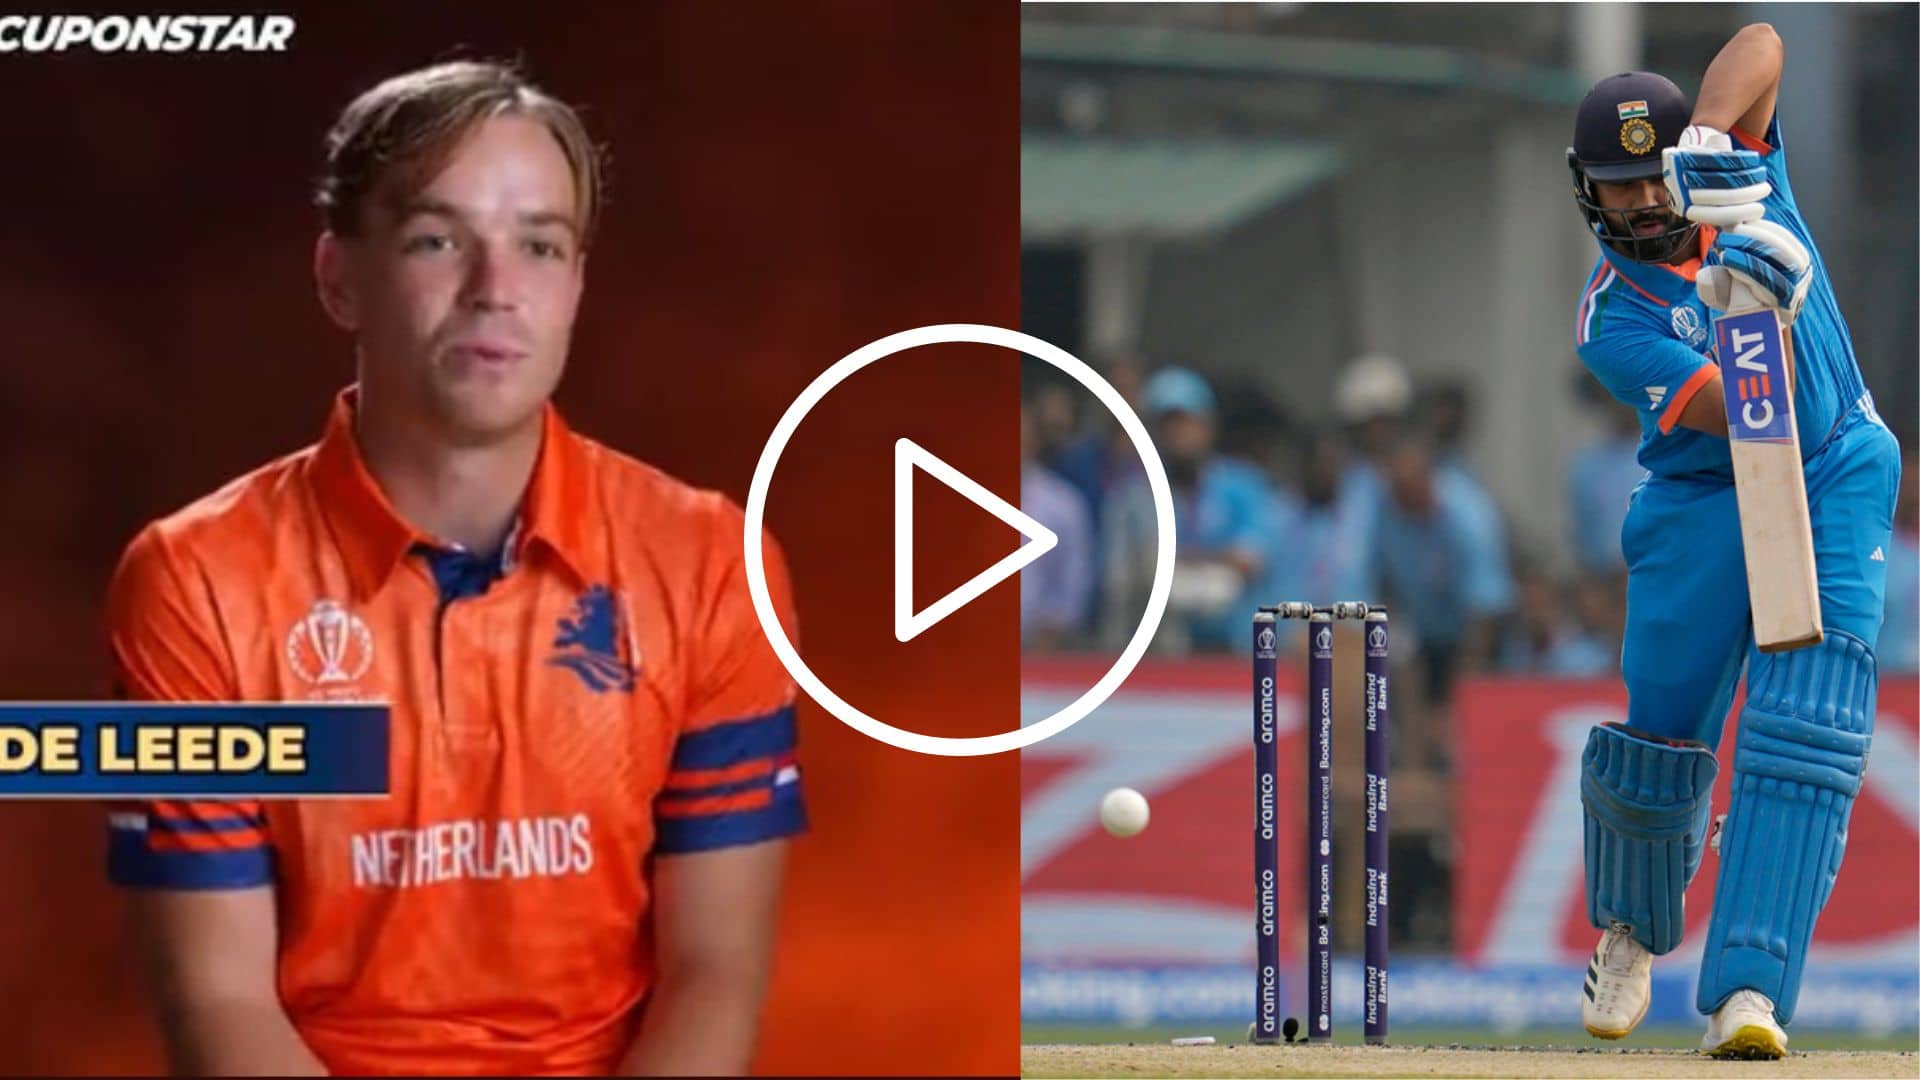 [Watch] Netherlands Players Praise Rohit Sharma Ahead Of World Cup Tie Against India